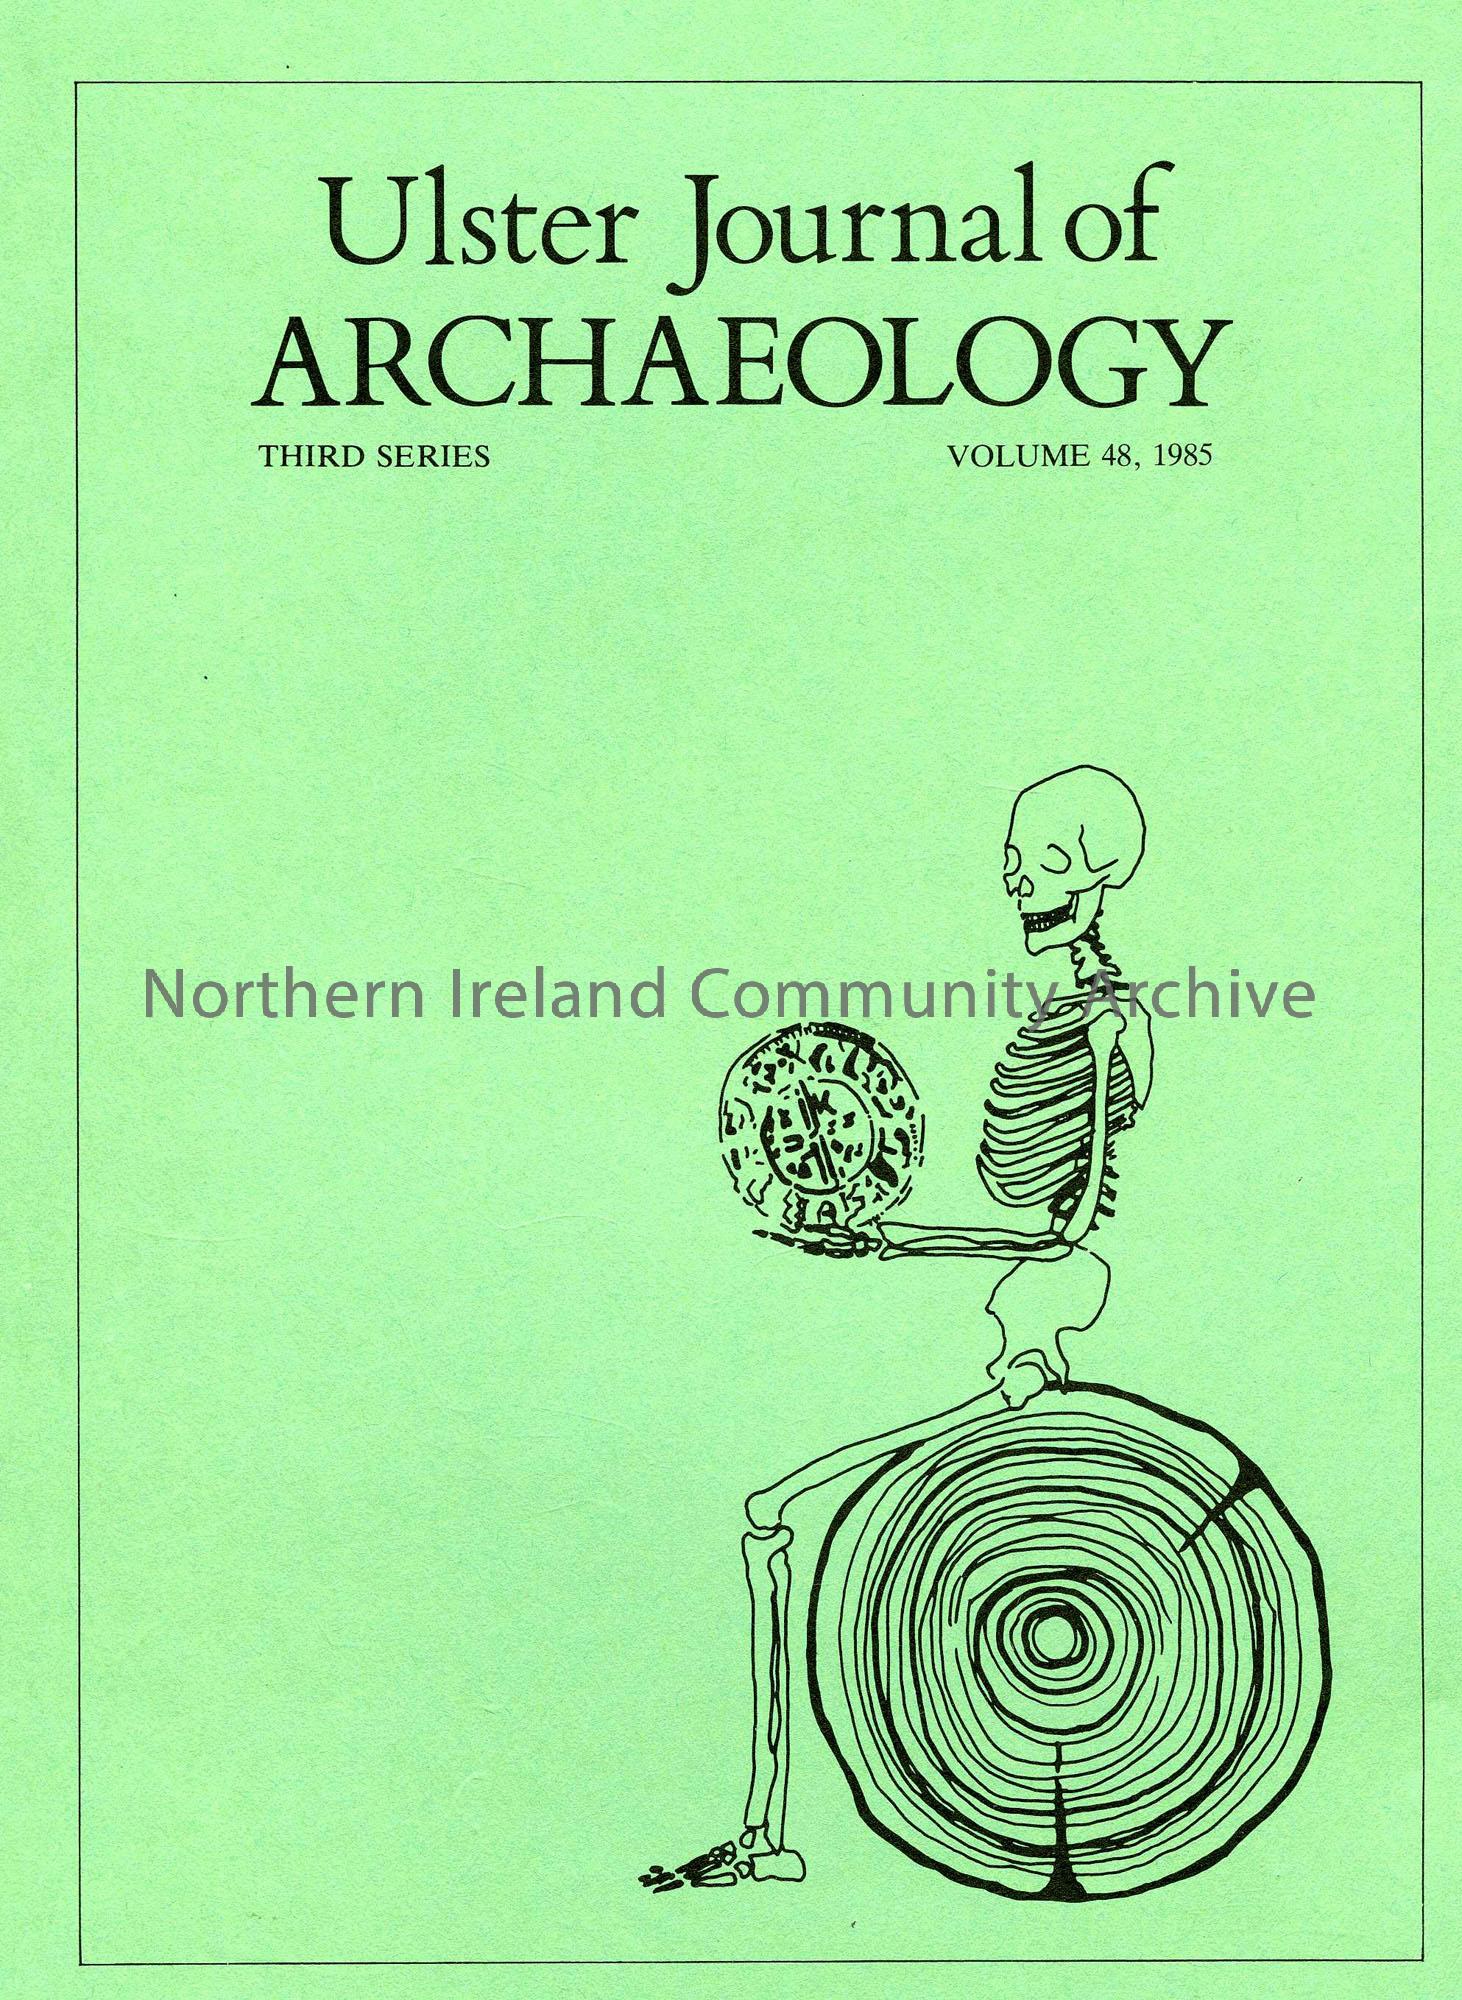 book titled, Ulster Journal of Archaeology. Third Series Volume 48, 1985 (2631)